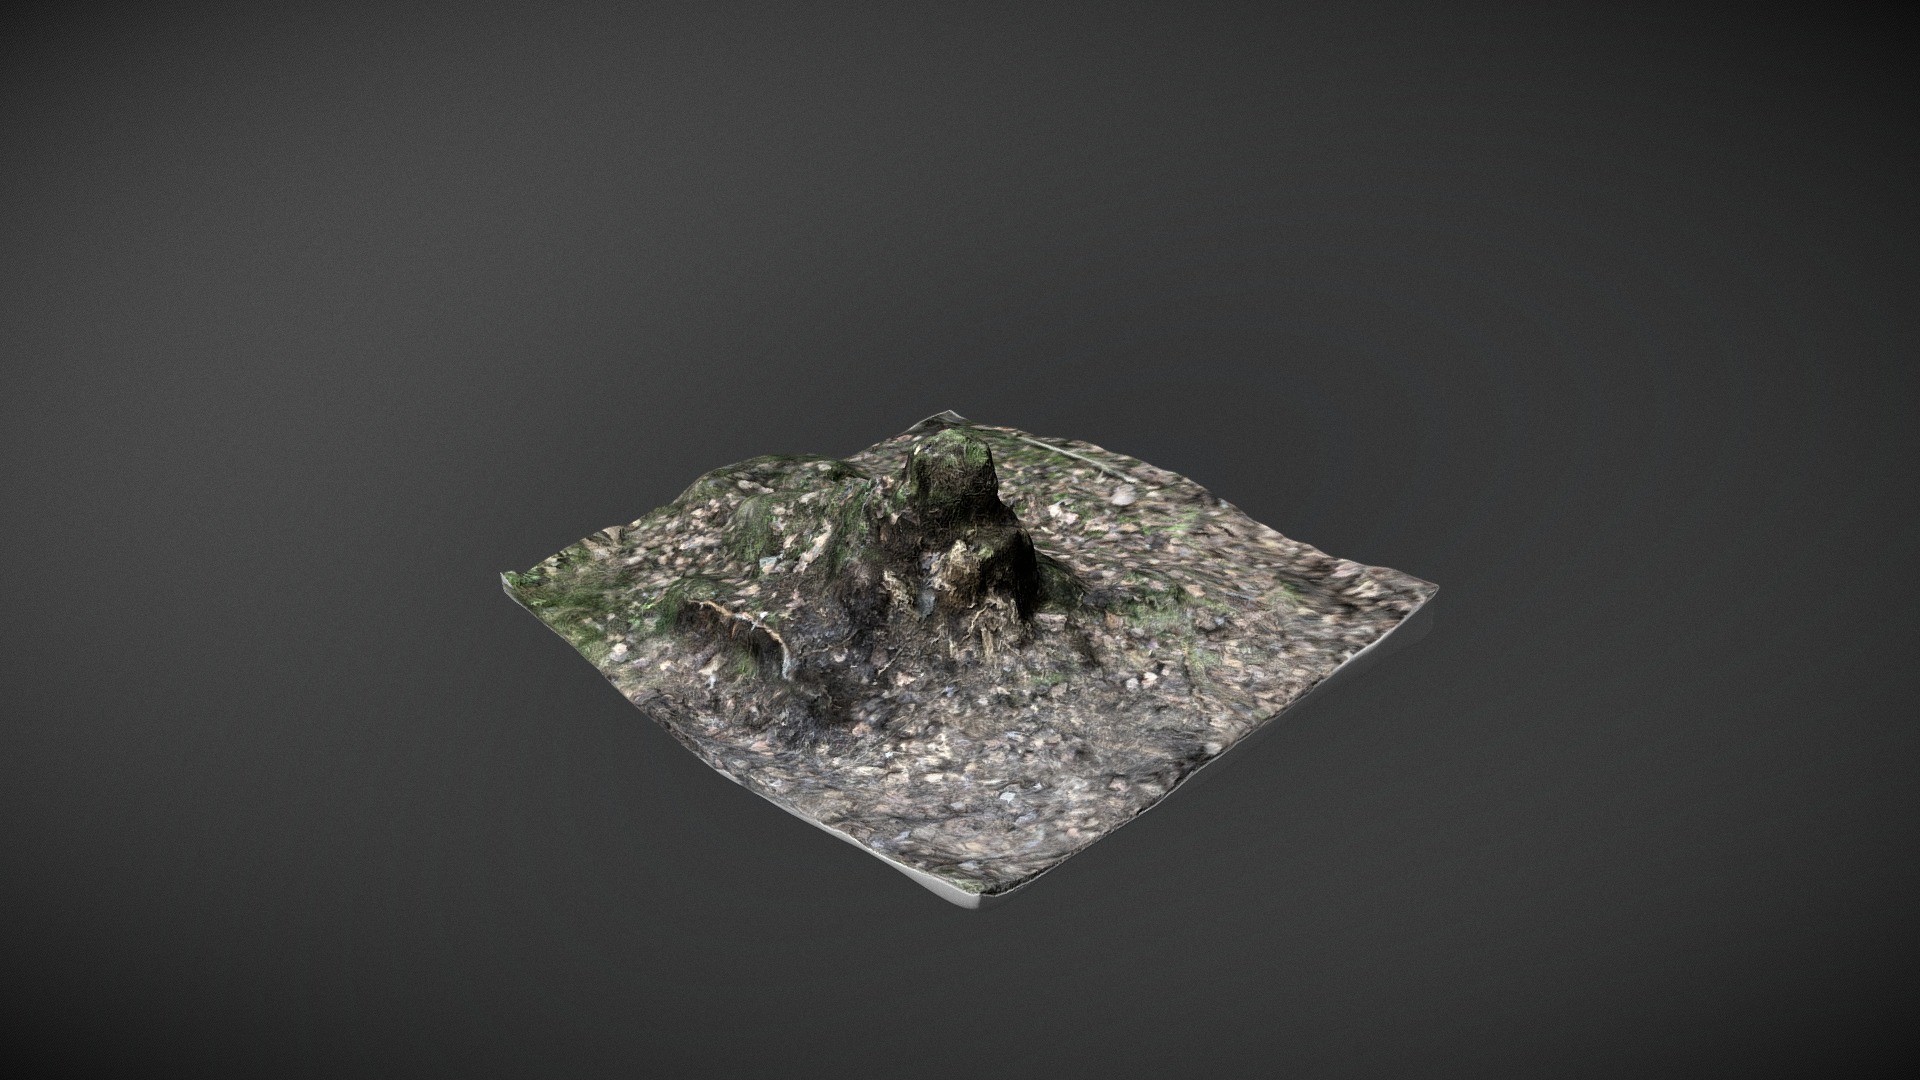 3D model Stump 001, Scanned - This is a 3D model of the Stump 001, Scanned. The 3D model is about a rock with a green substance.